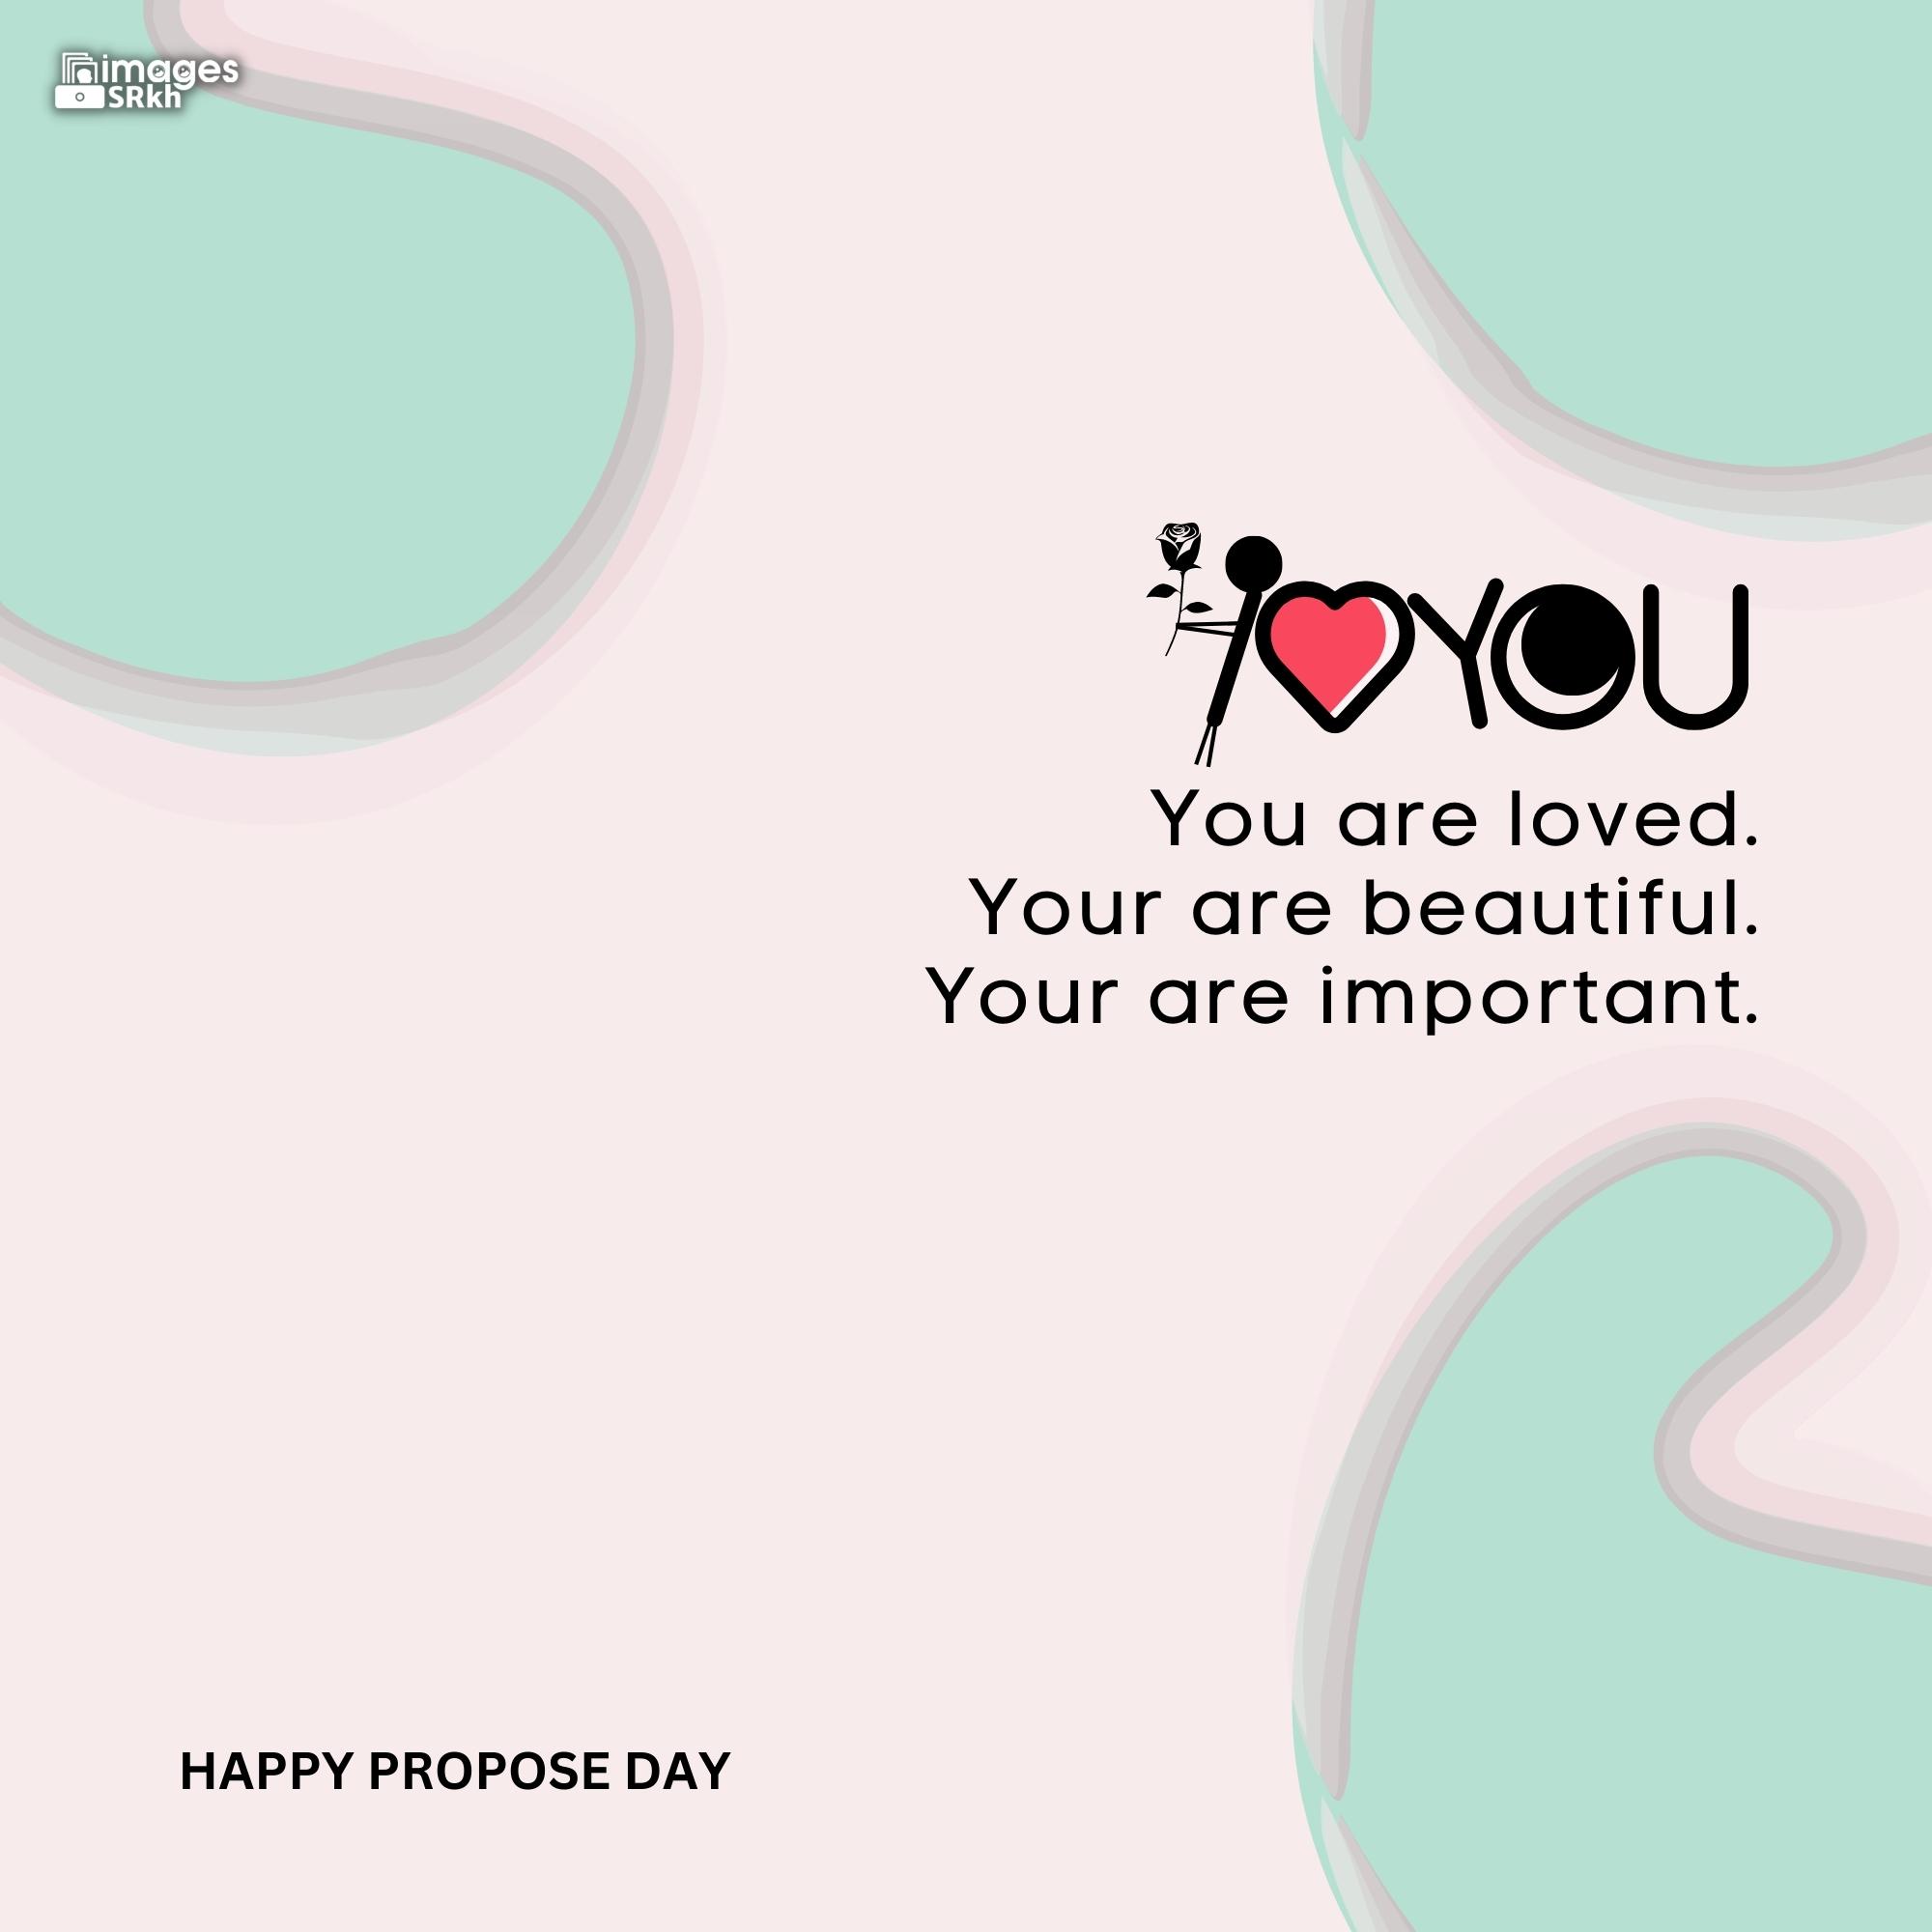 Happy Propose Day Images | 393 | I LOVE YOU